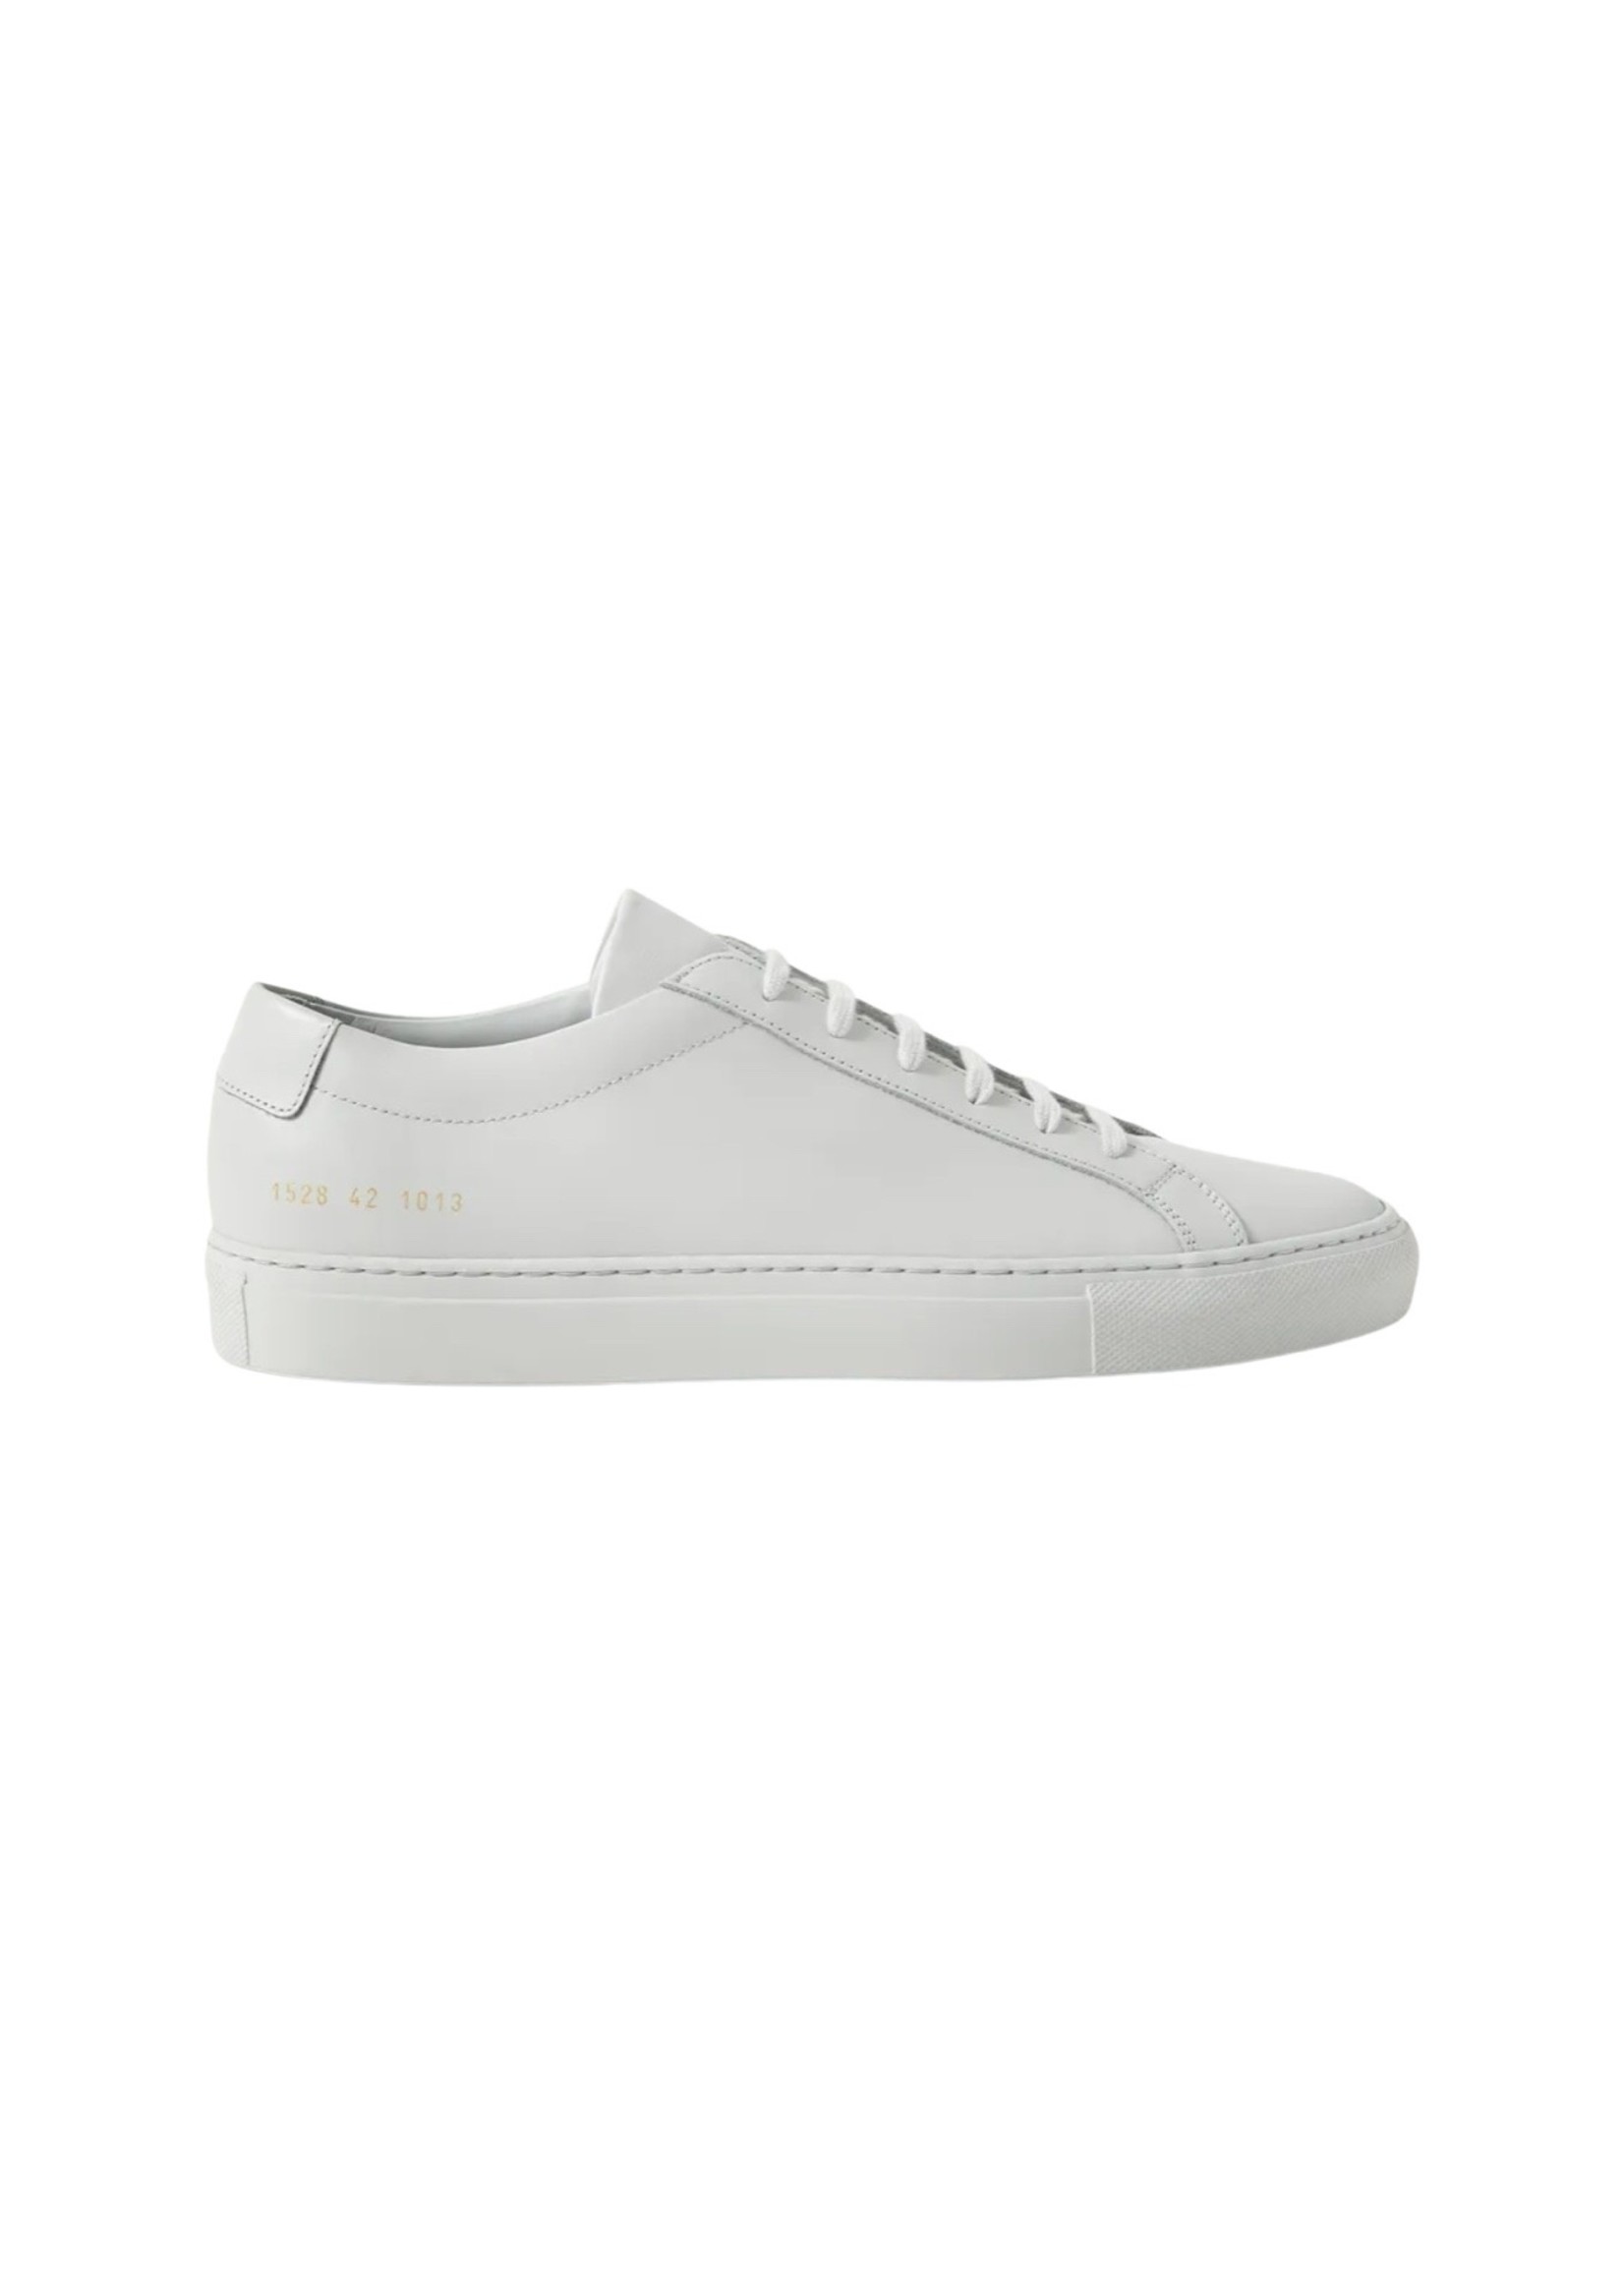 COMMON PROJECTS ACHILLES LOW IN NAPA LEATHER